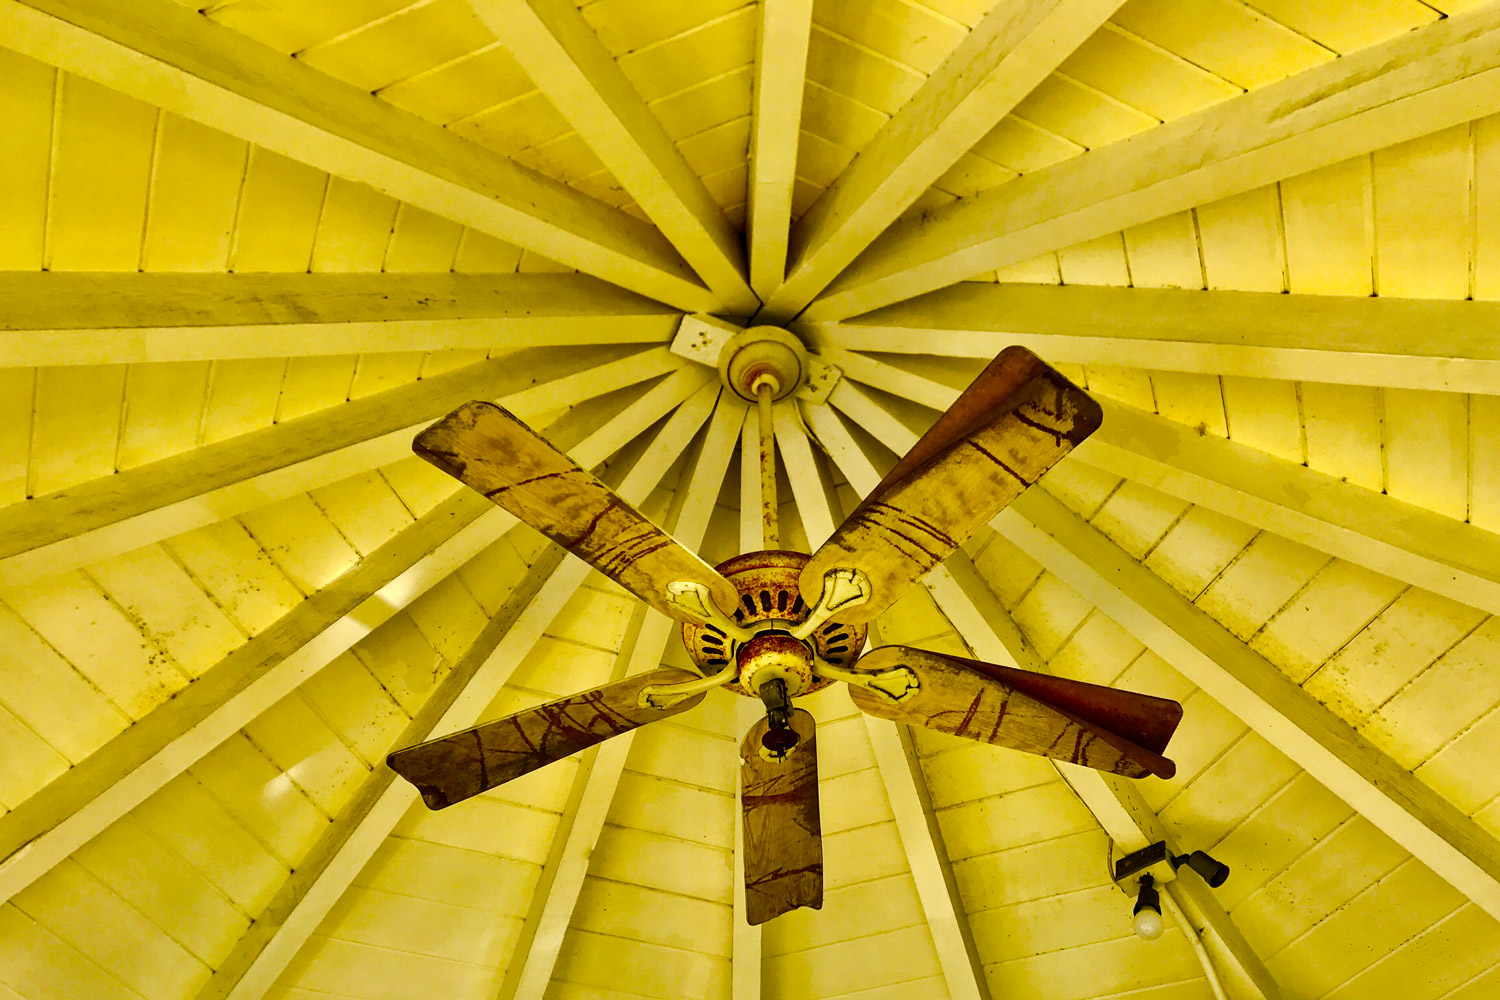 Carribean Ceiling fan with matching color of ceiling, should ceiling fan match ceiling color or hardwood